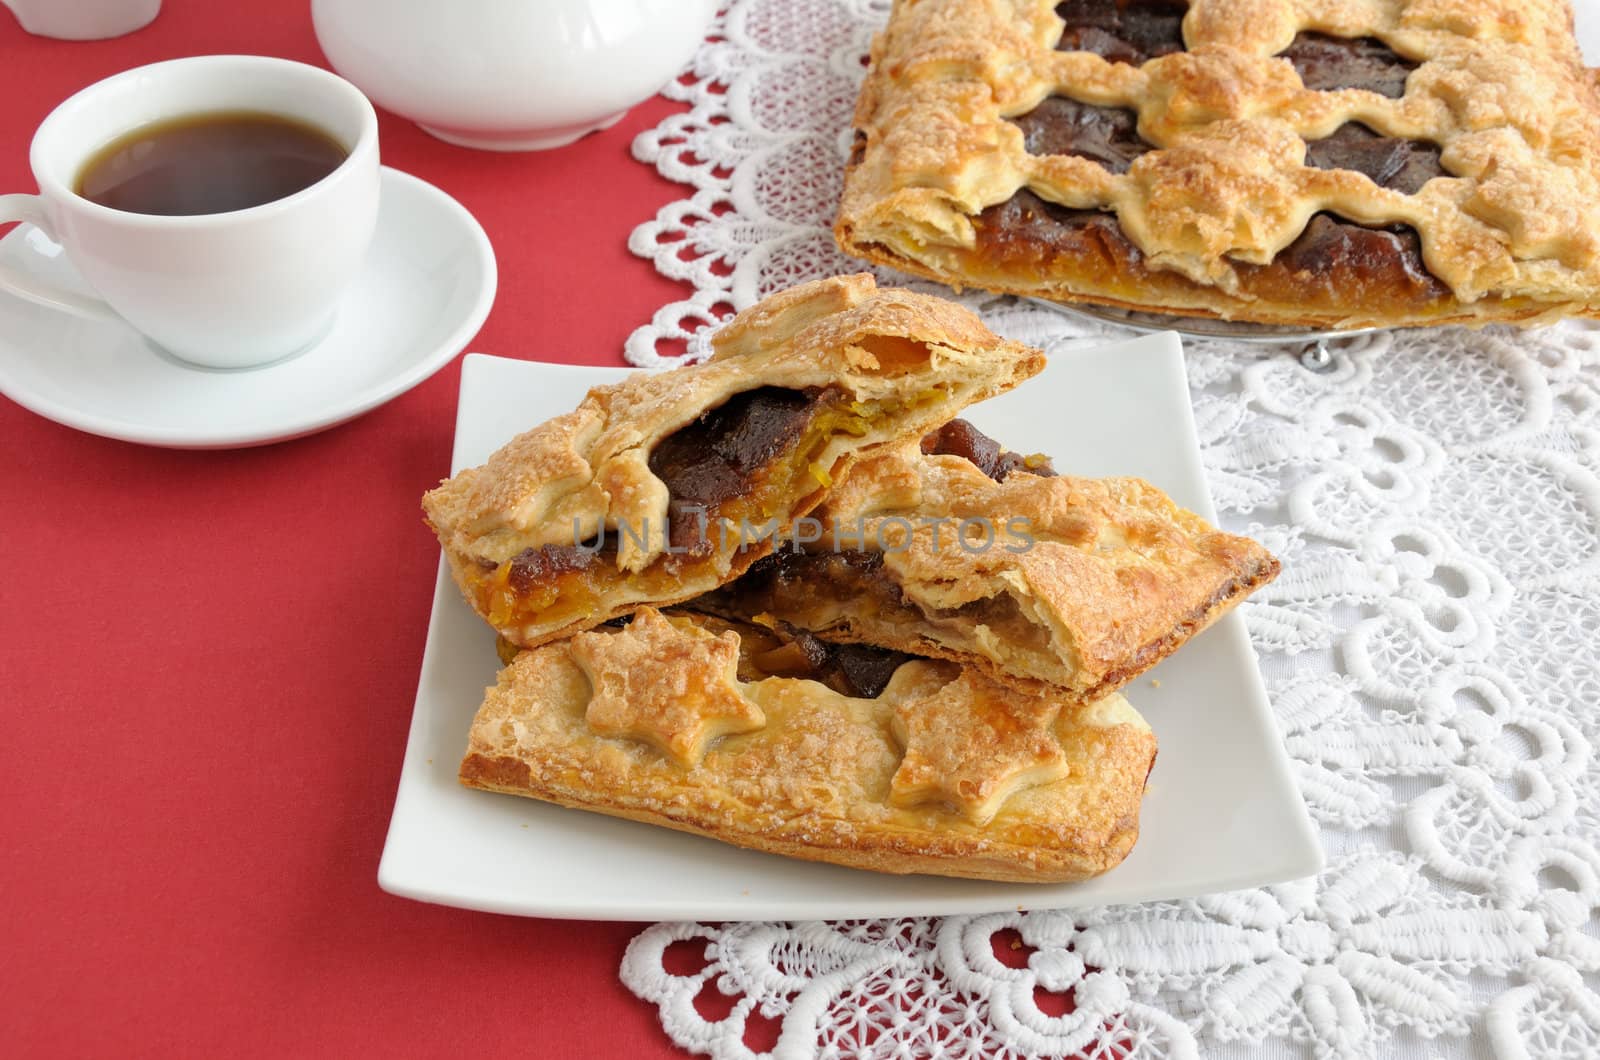 Pieces of strudel stuffed with apples and jam